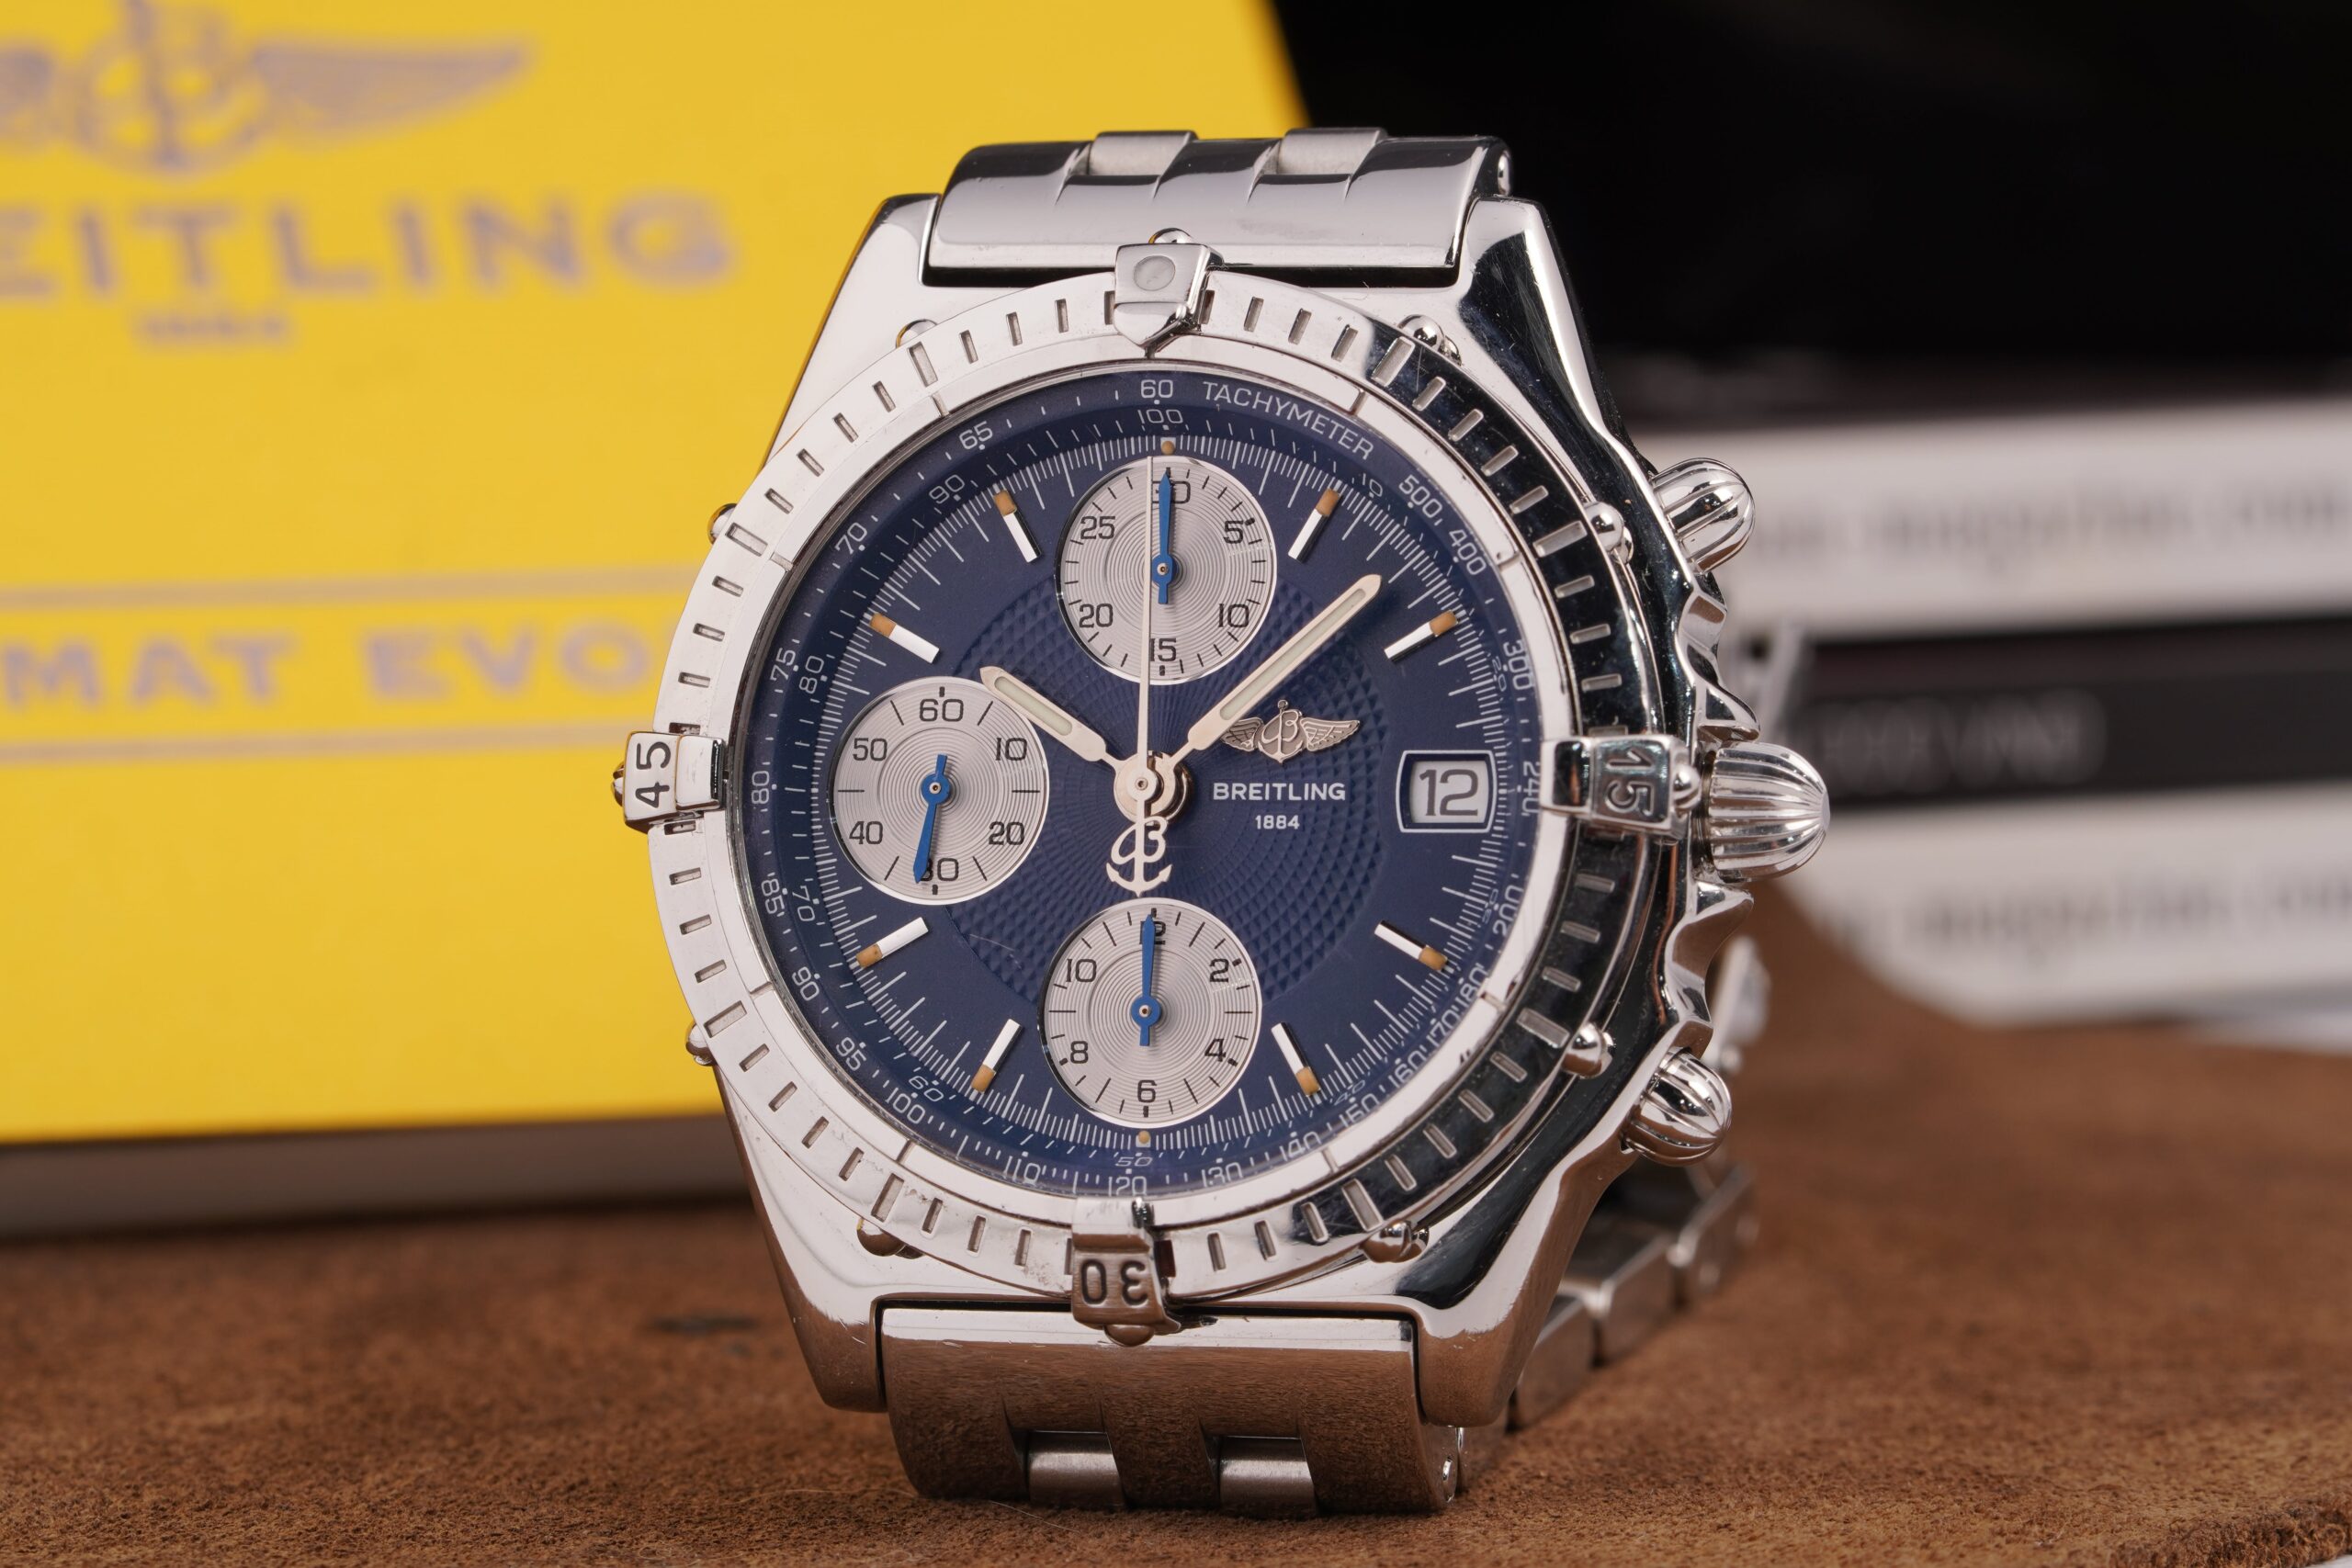 A silver bezel and blue dial Breitling watch